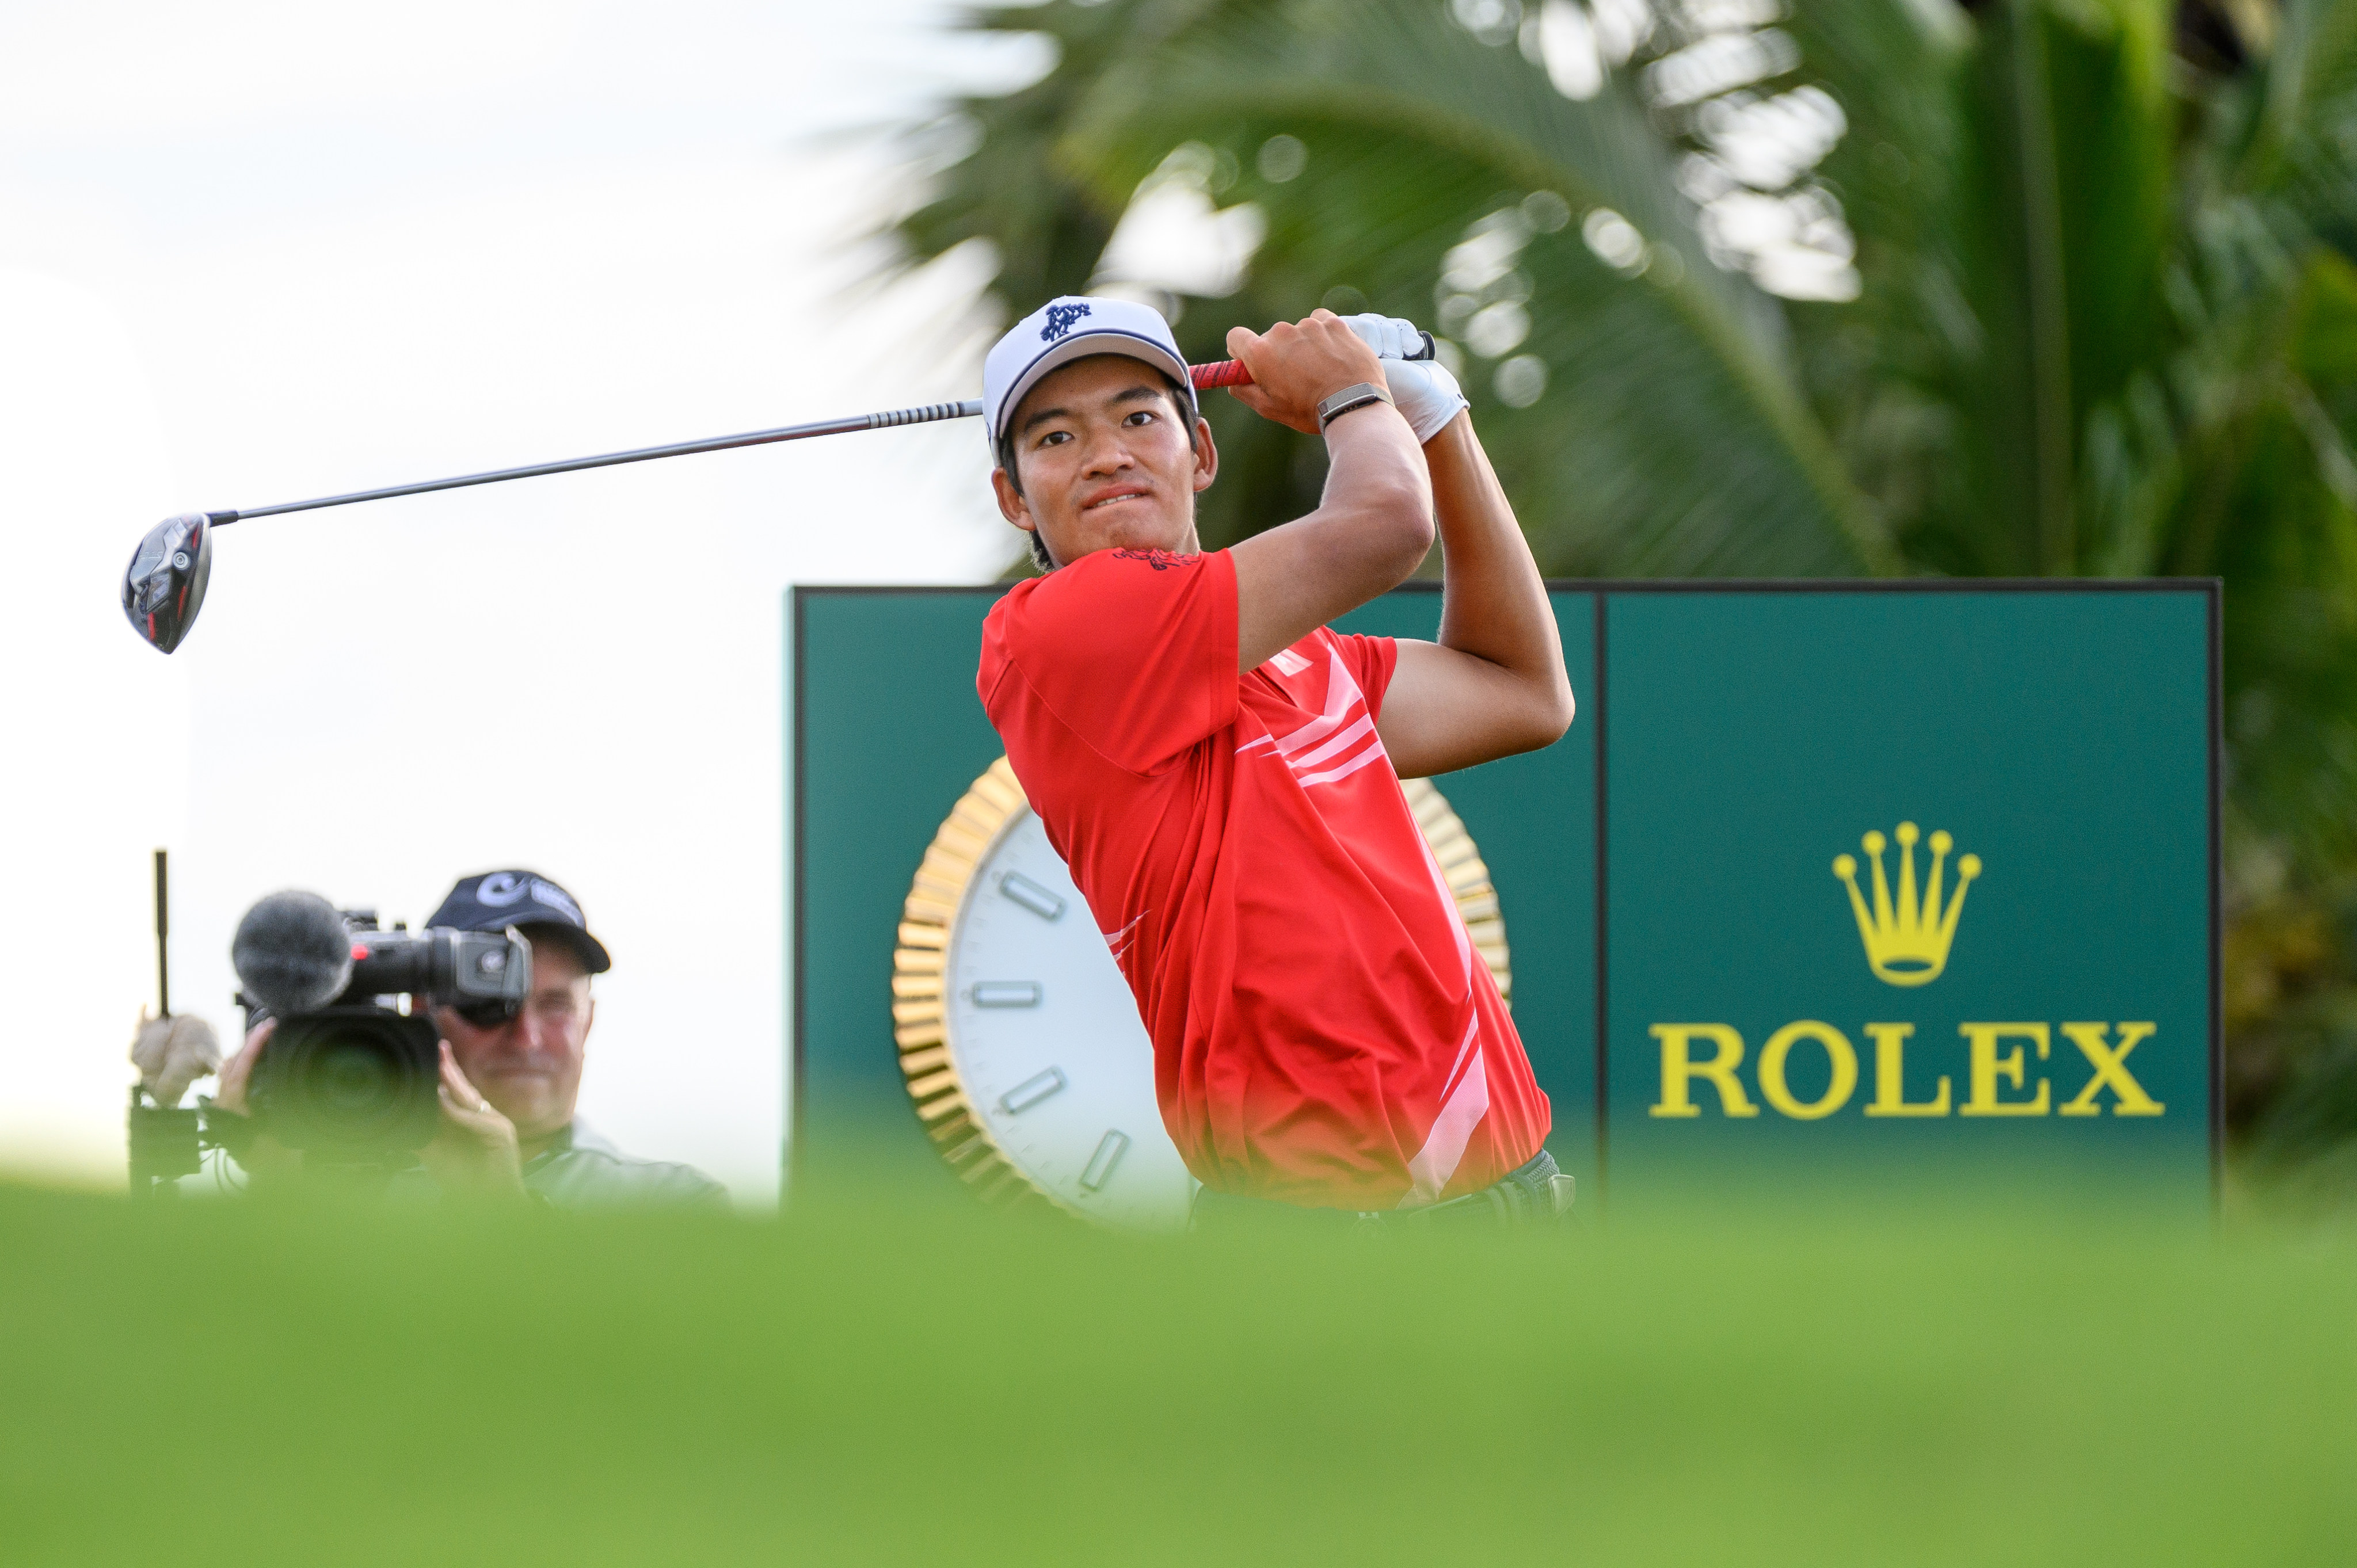 The options and potential earnings for amateur stars like Taichi Kho are growing. Photo: AAC